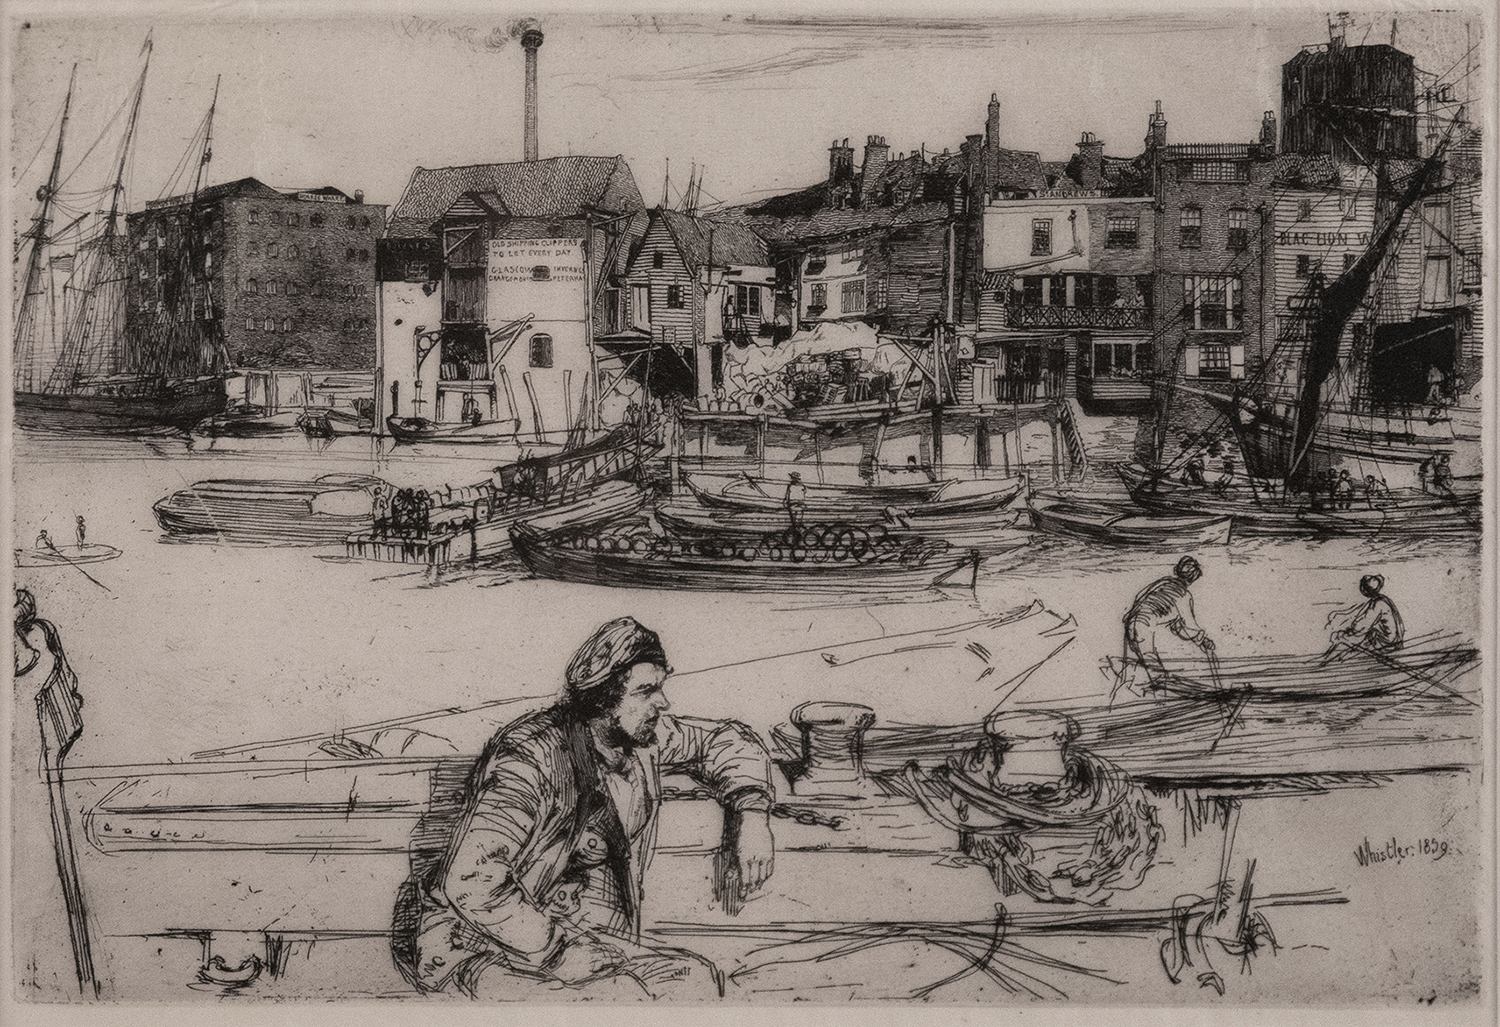 James A. McNeill Whistler (1834-1903), Black Lion Wharf (1859). From the collection of Lynn May. Etching